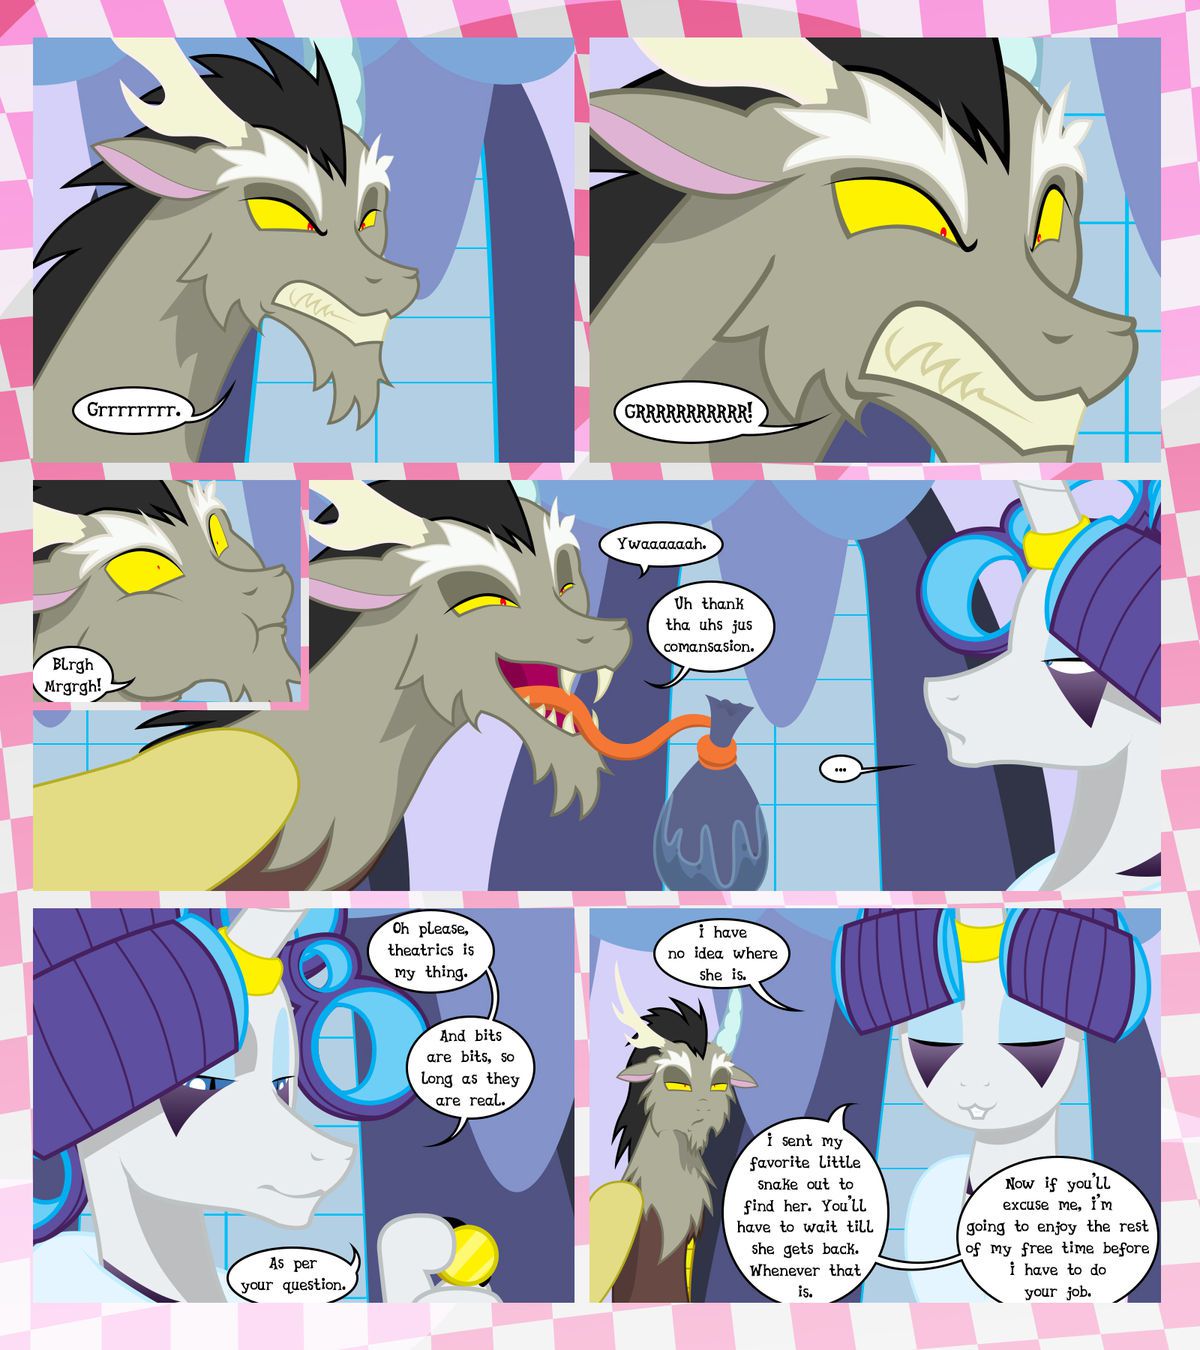 [GatesMcCloud] Cutie Mark Crusaders 10k: Chapter 3 - The Lost (My Little Pony: Friendship is Magic) [English] [Ongoing] 67